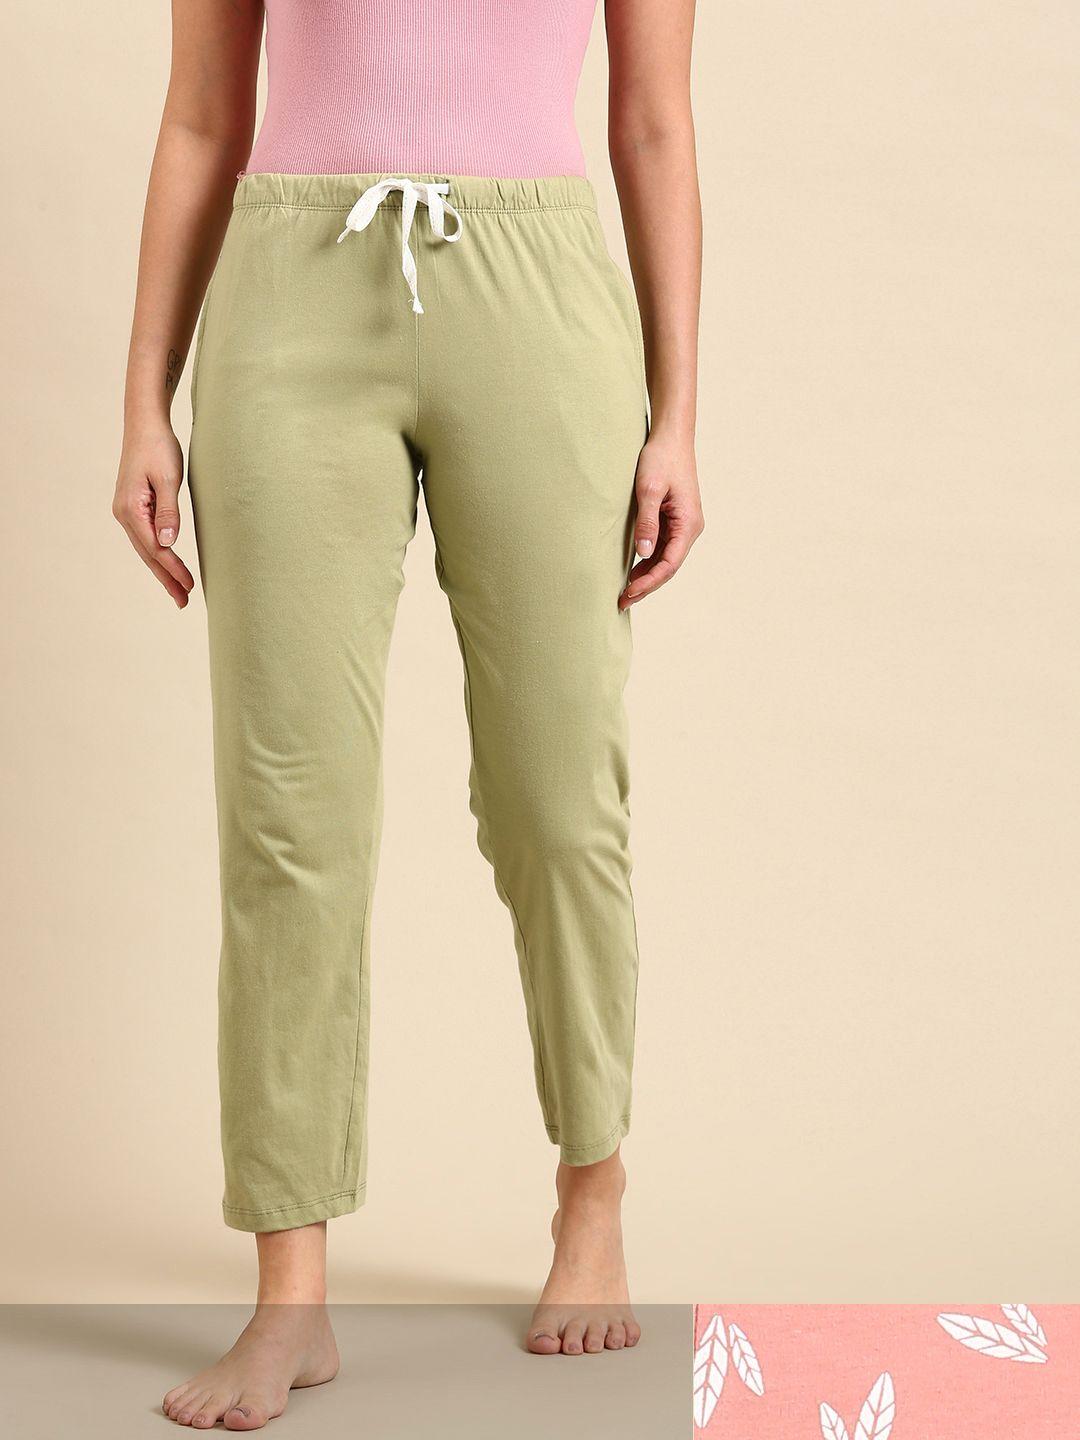 dreamz by pantaloons women set of 2 peach-coloured & olive green cotton lounge pants